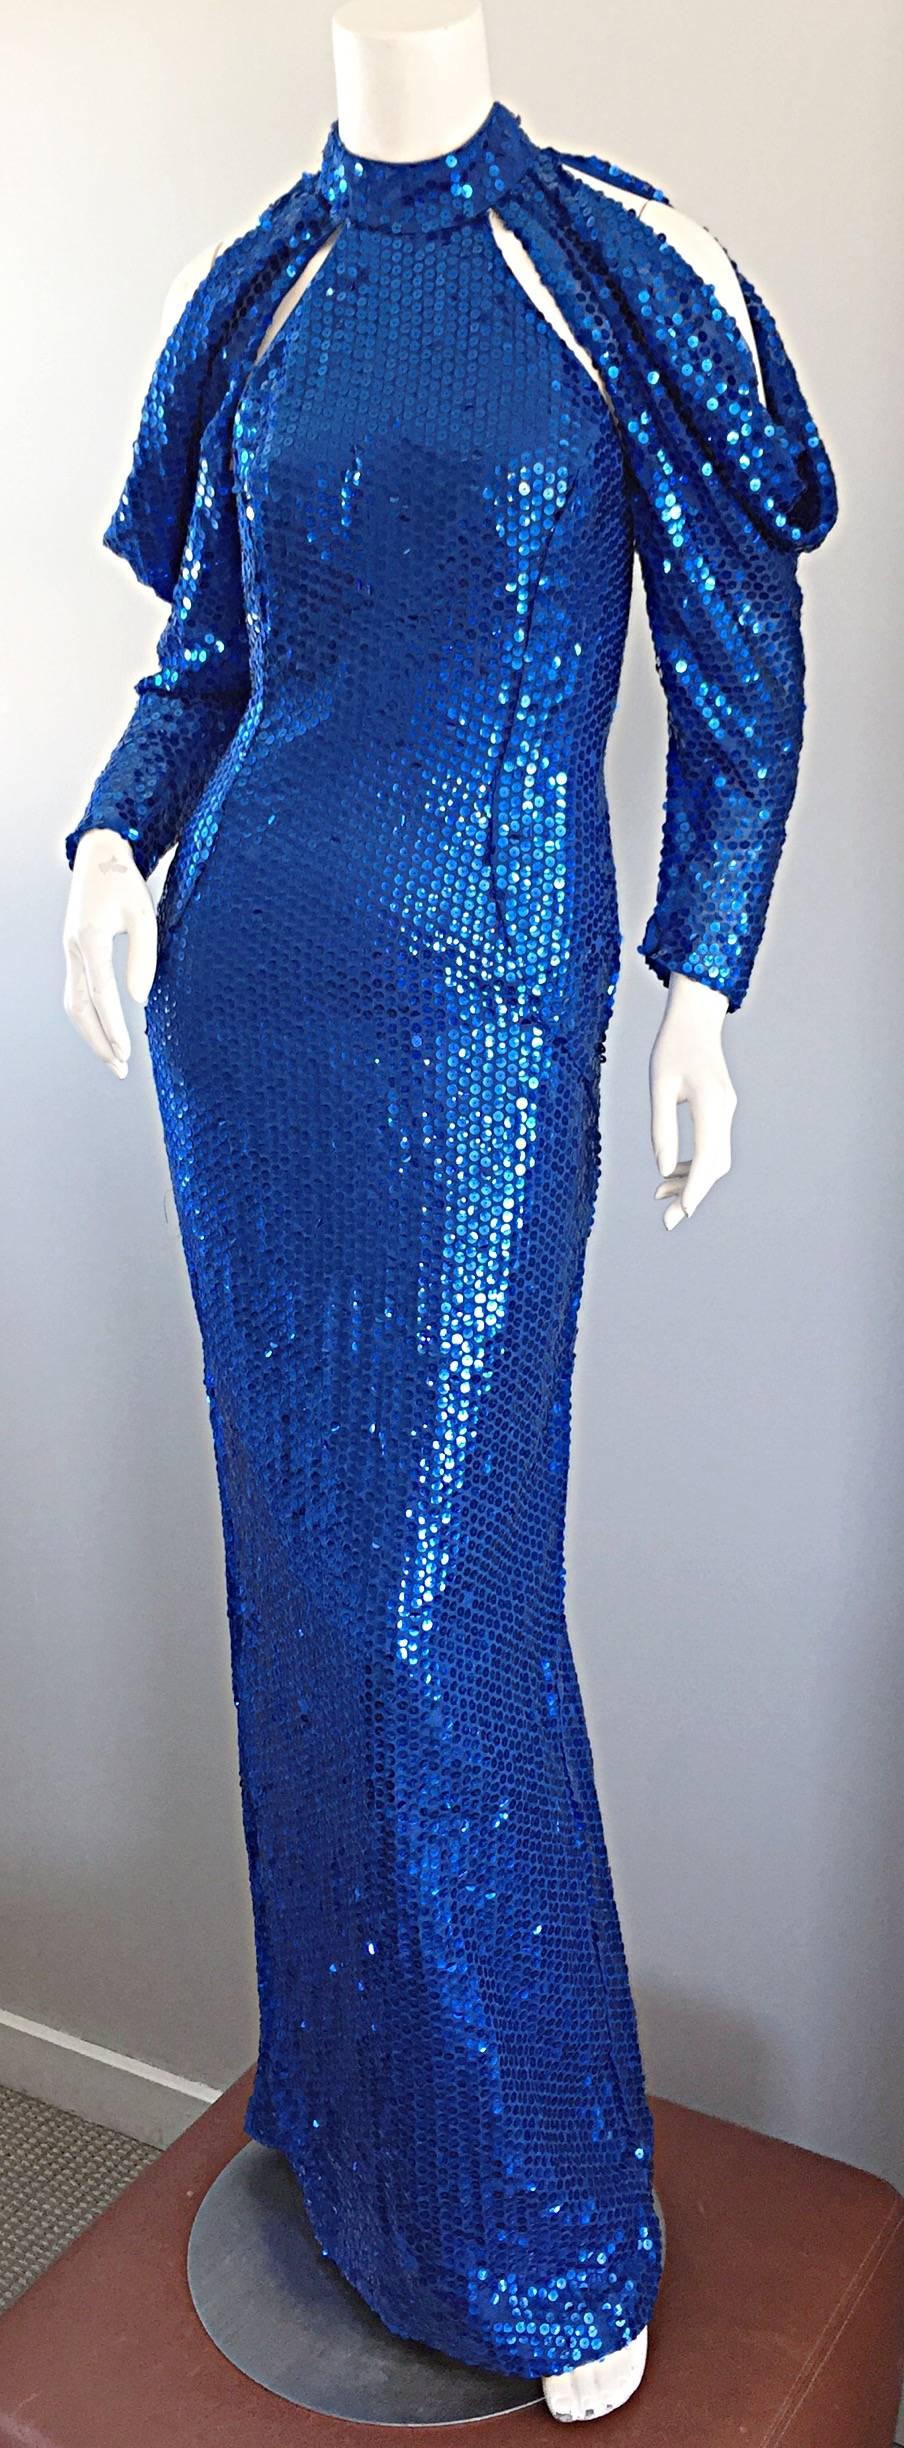 Sexy vintage 1970s royal blue fully sequined silk dress! Features multiple cut-outs above the bust, and at each shoulder. Flattering open back reveals just the right amount of skin. Amazing construction, with heavy attention to detail. Hidden zipper